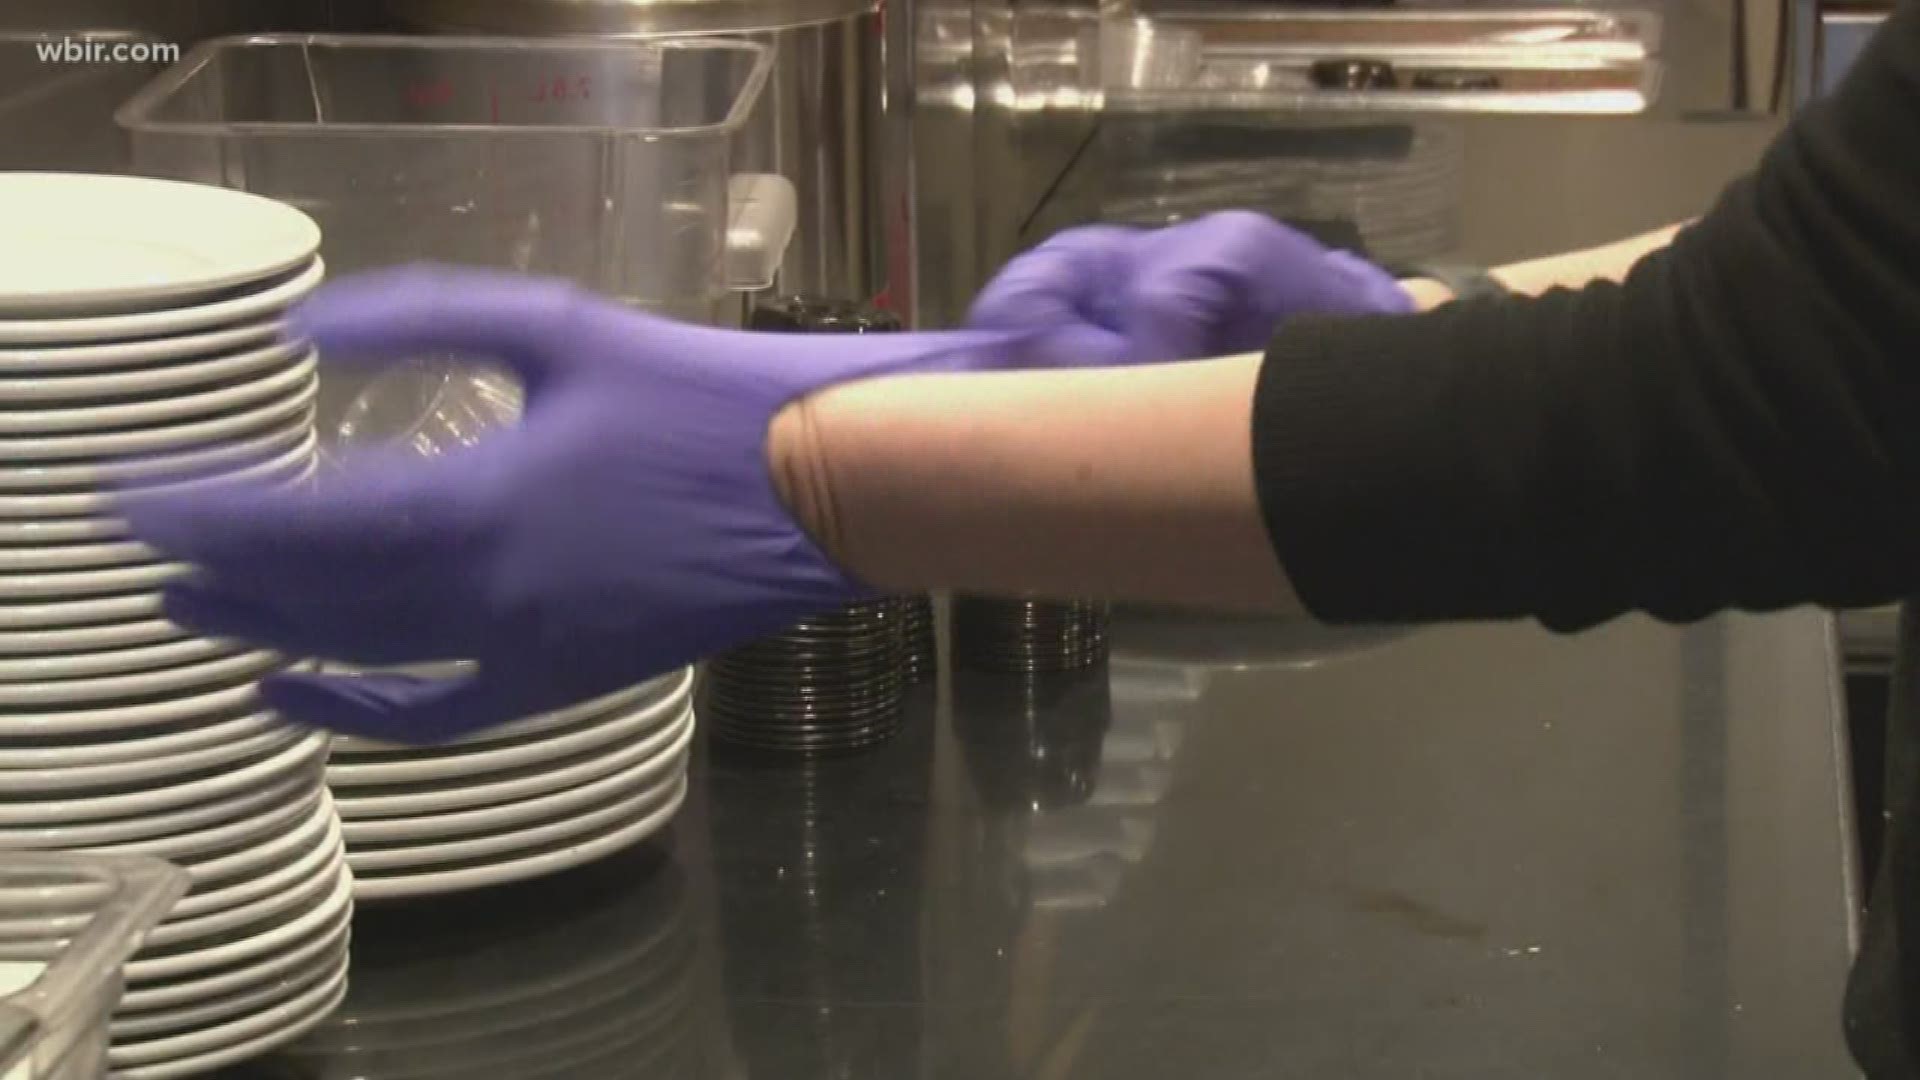 With recommendations to stay home in the wake of the coronavirus, restaurants like Cafe 4 say they see a decrease in clientele.